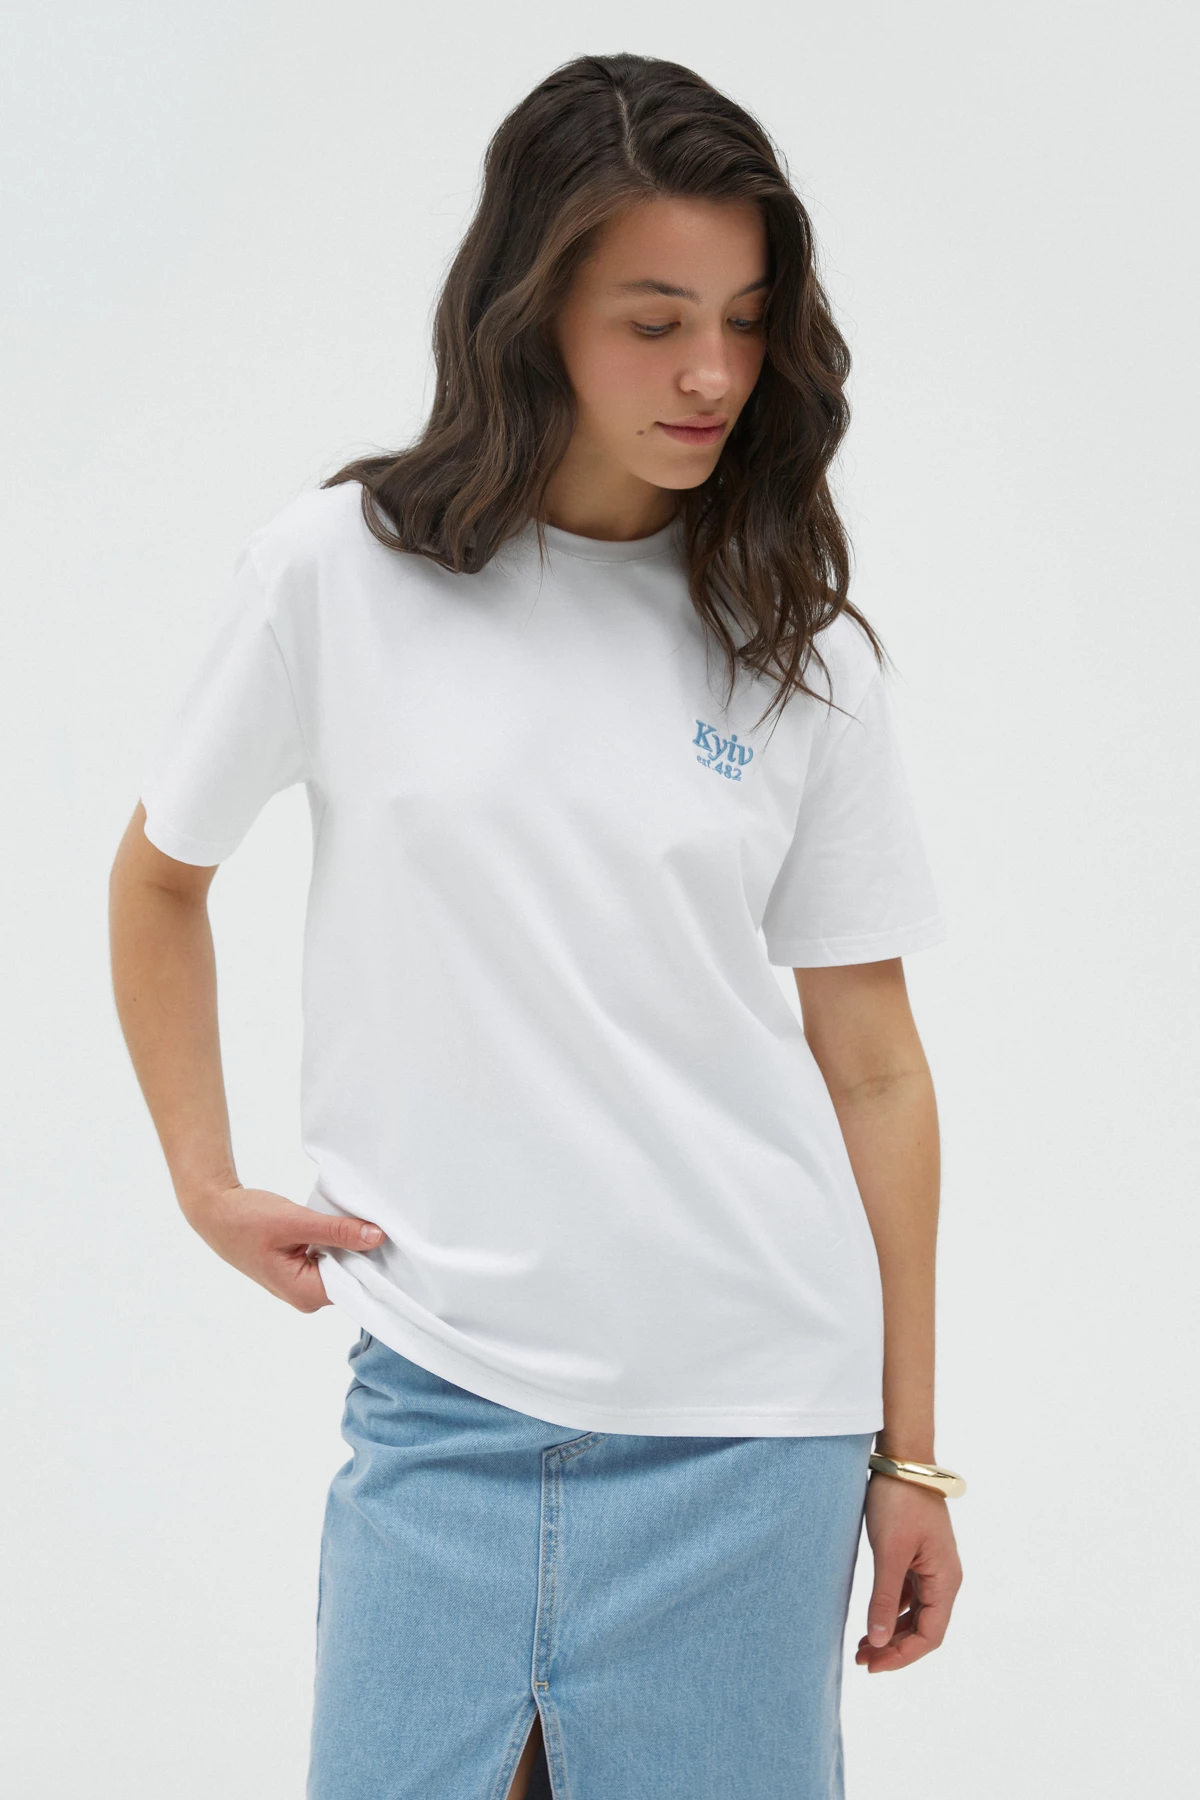 White t-shirt with blue embroidery "Kyiv", photo 2